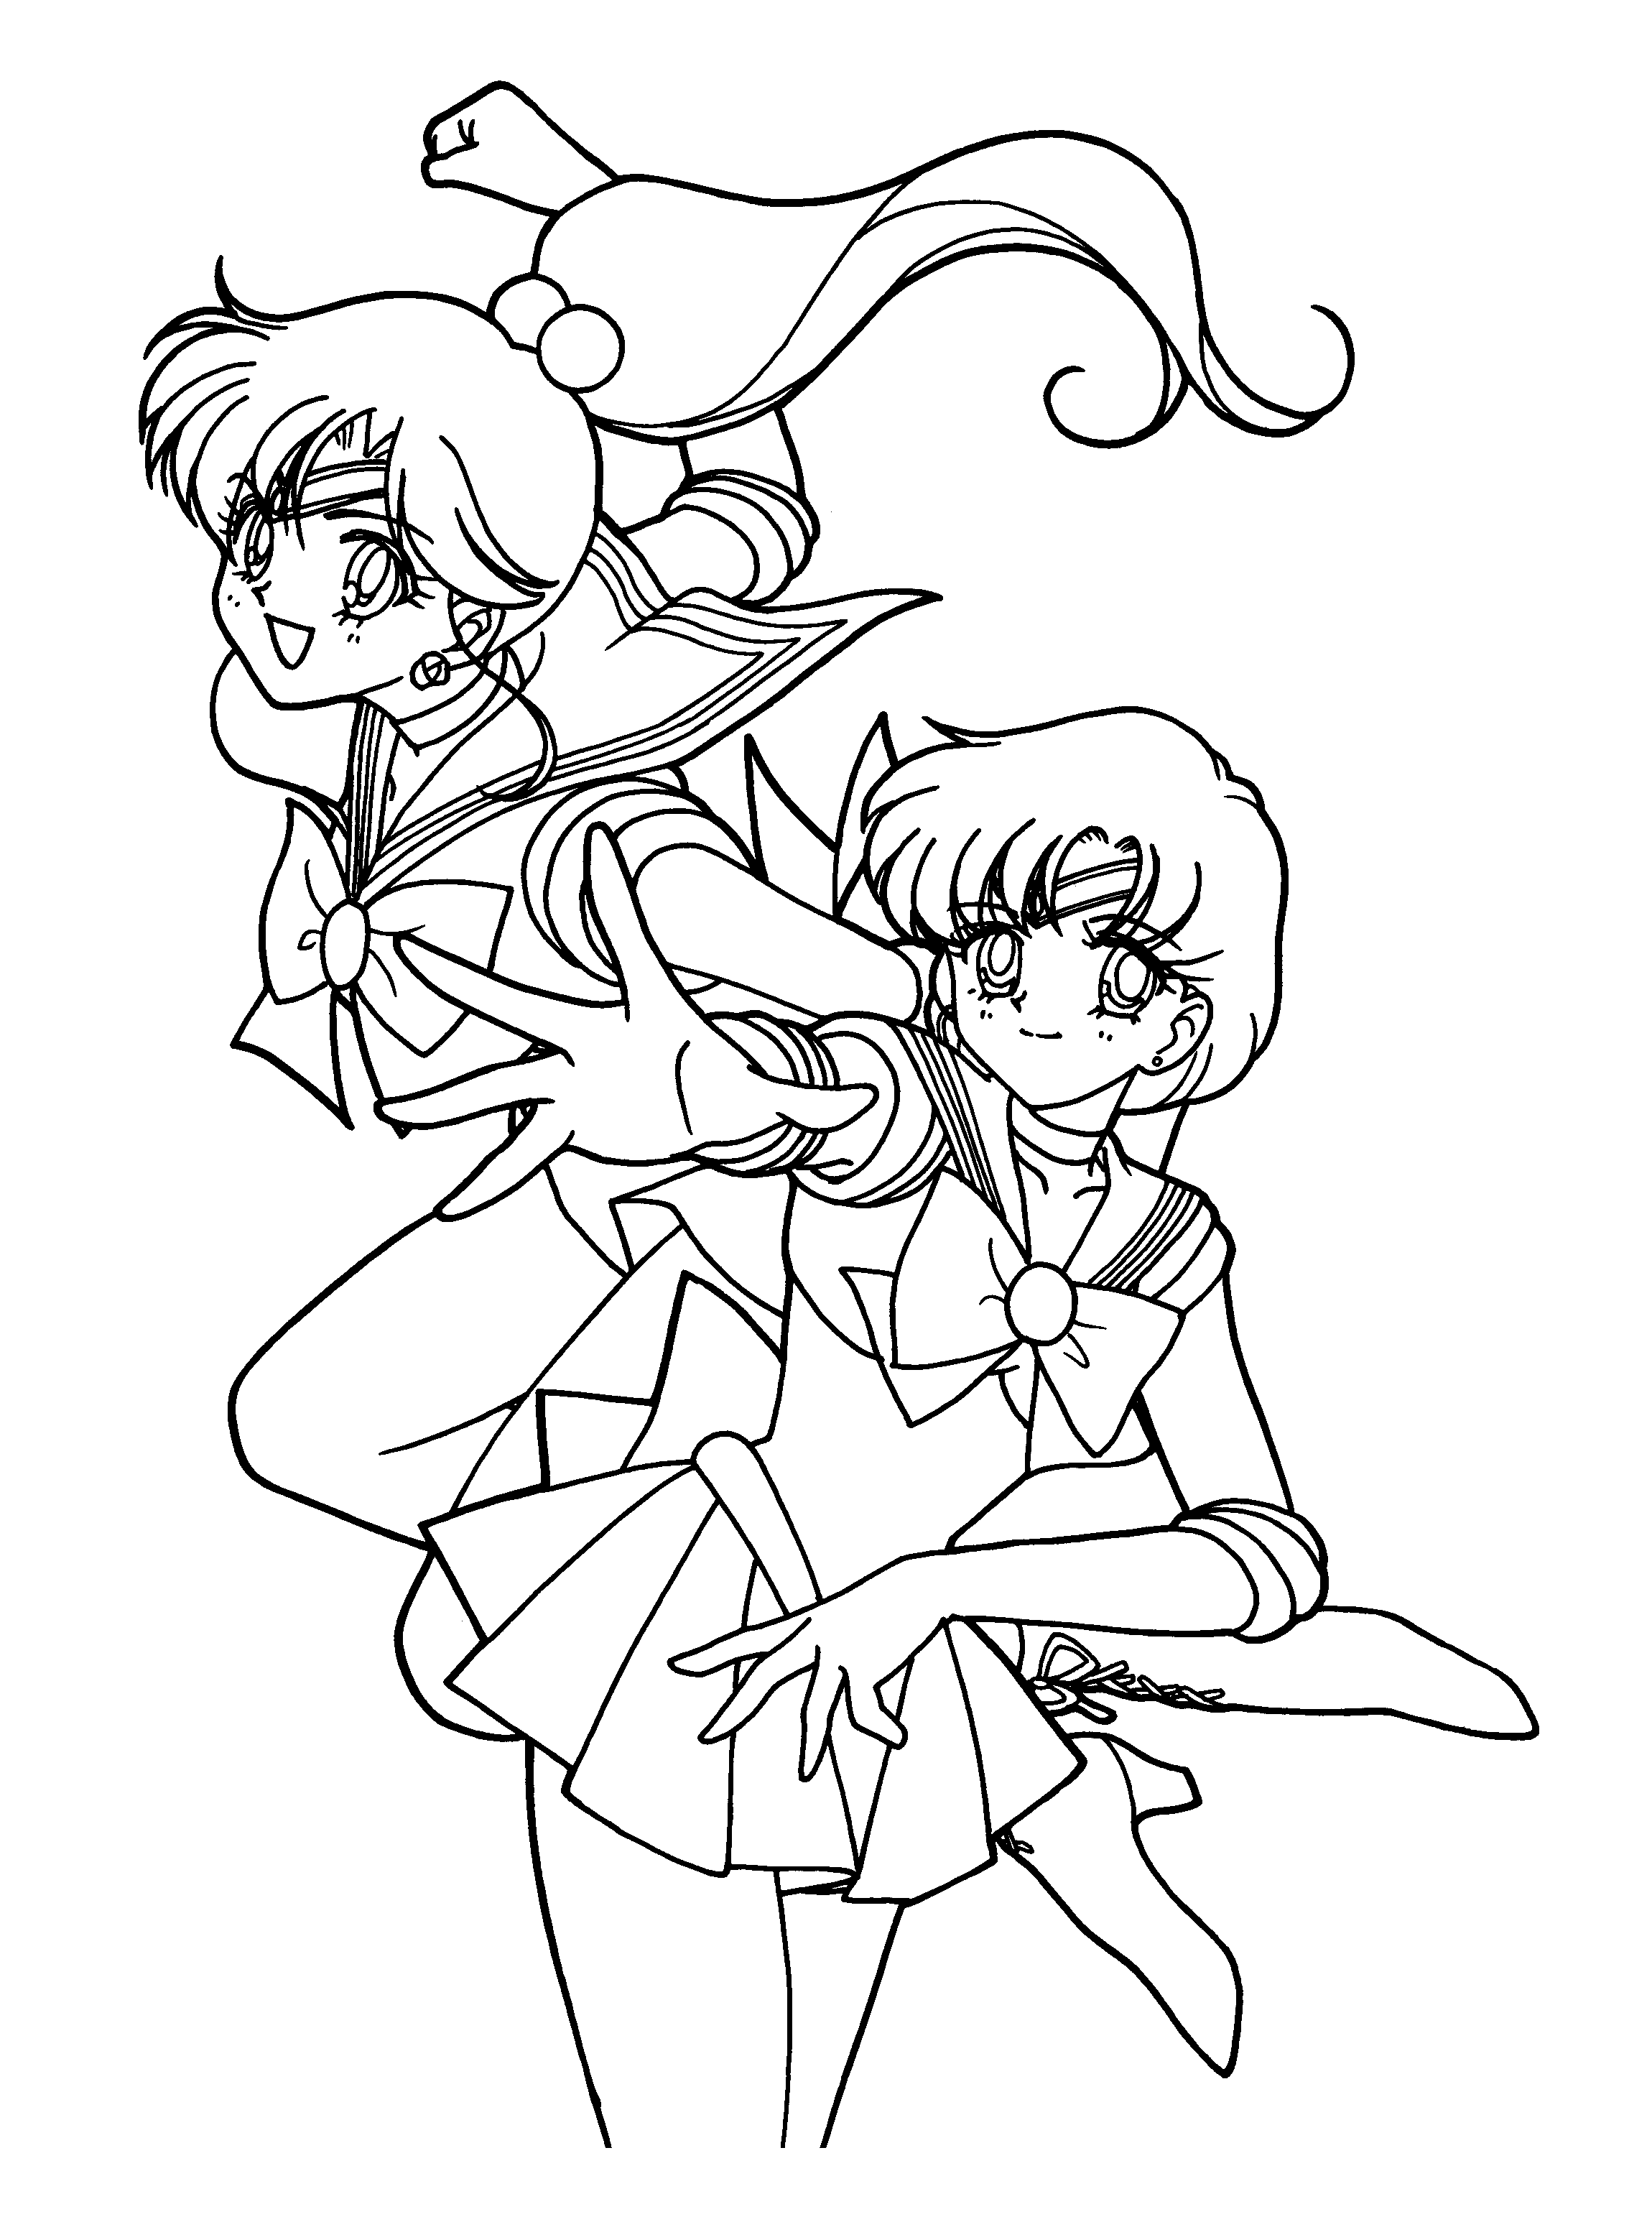 animated-coloring-pages-sailor-moon-image-0099